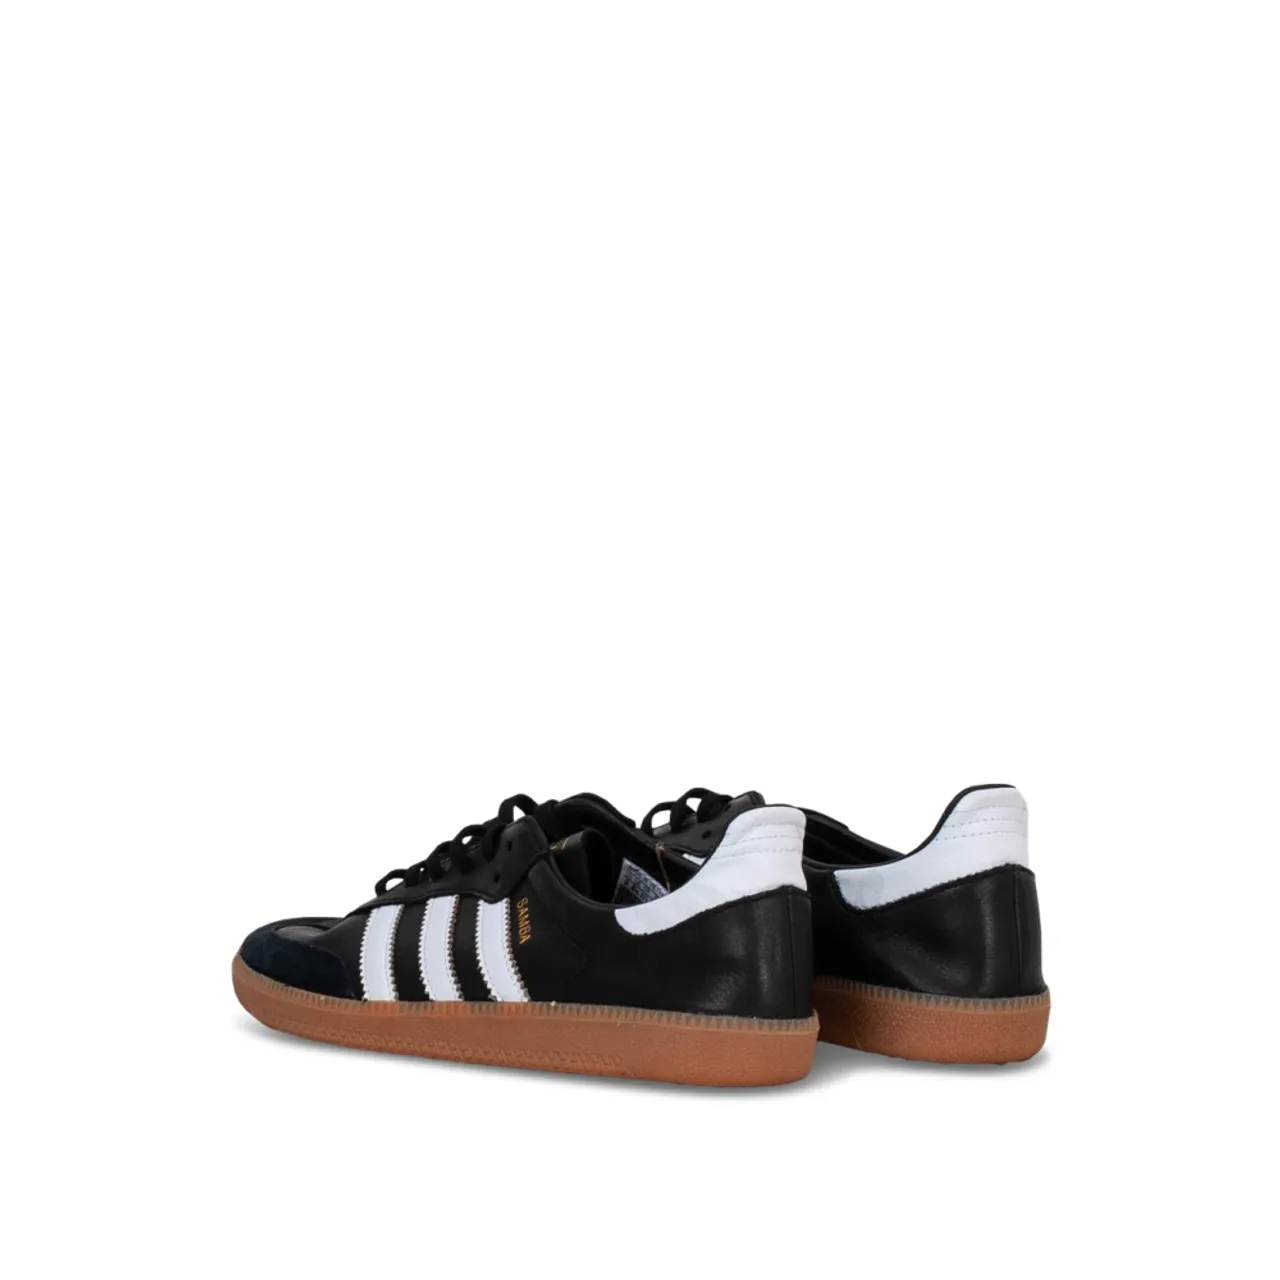 Adidas Originals , Black Sneakers with Leather Upper and Gum Sole ,Black male, Sizes: